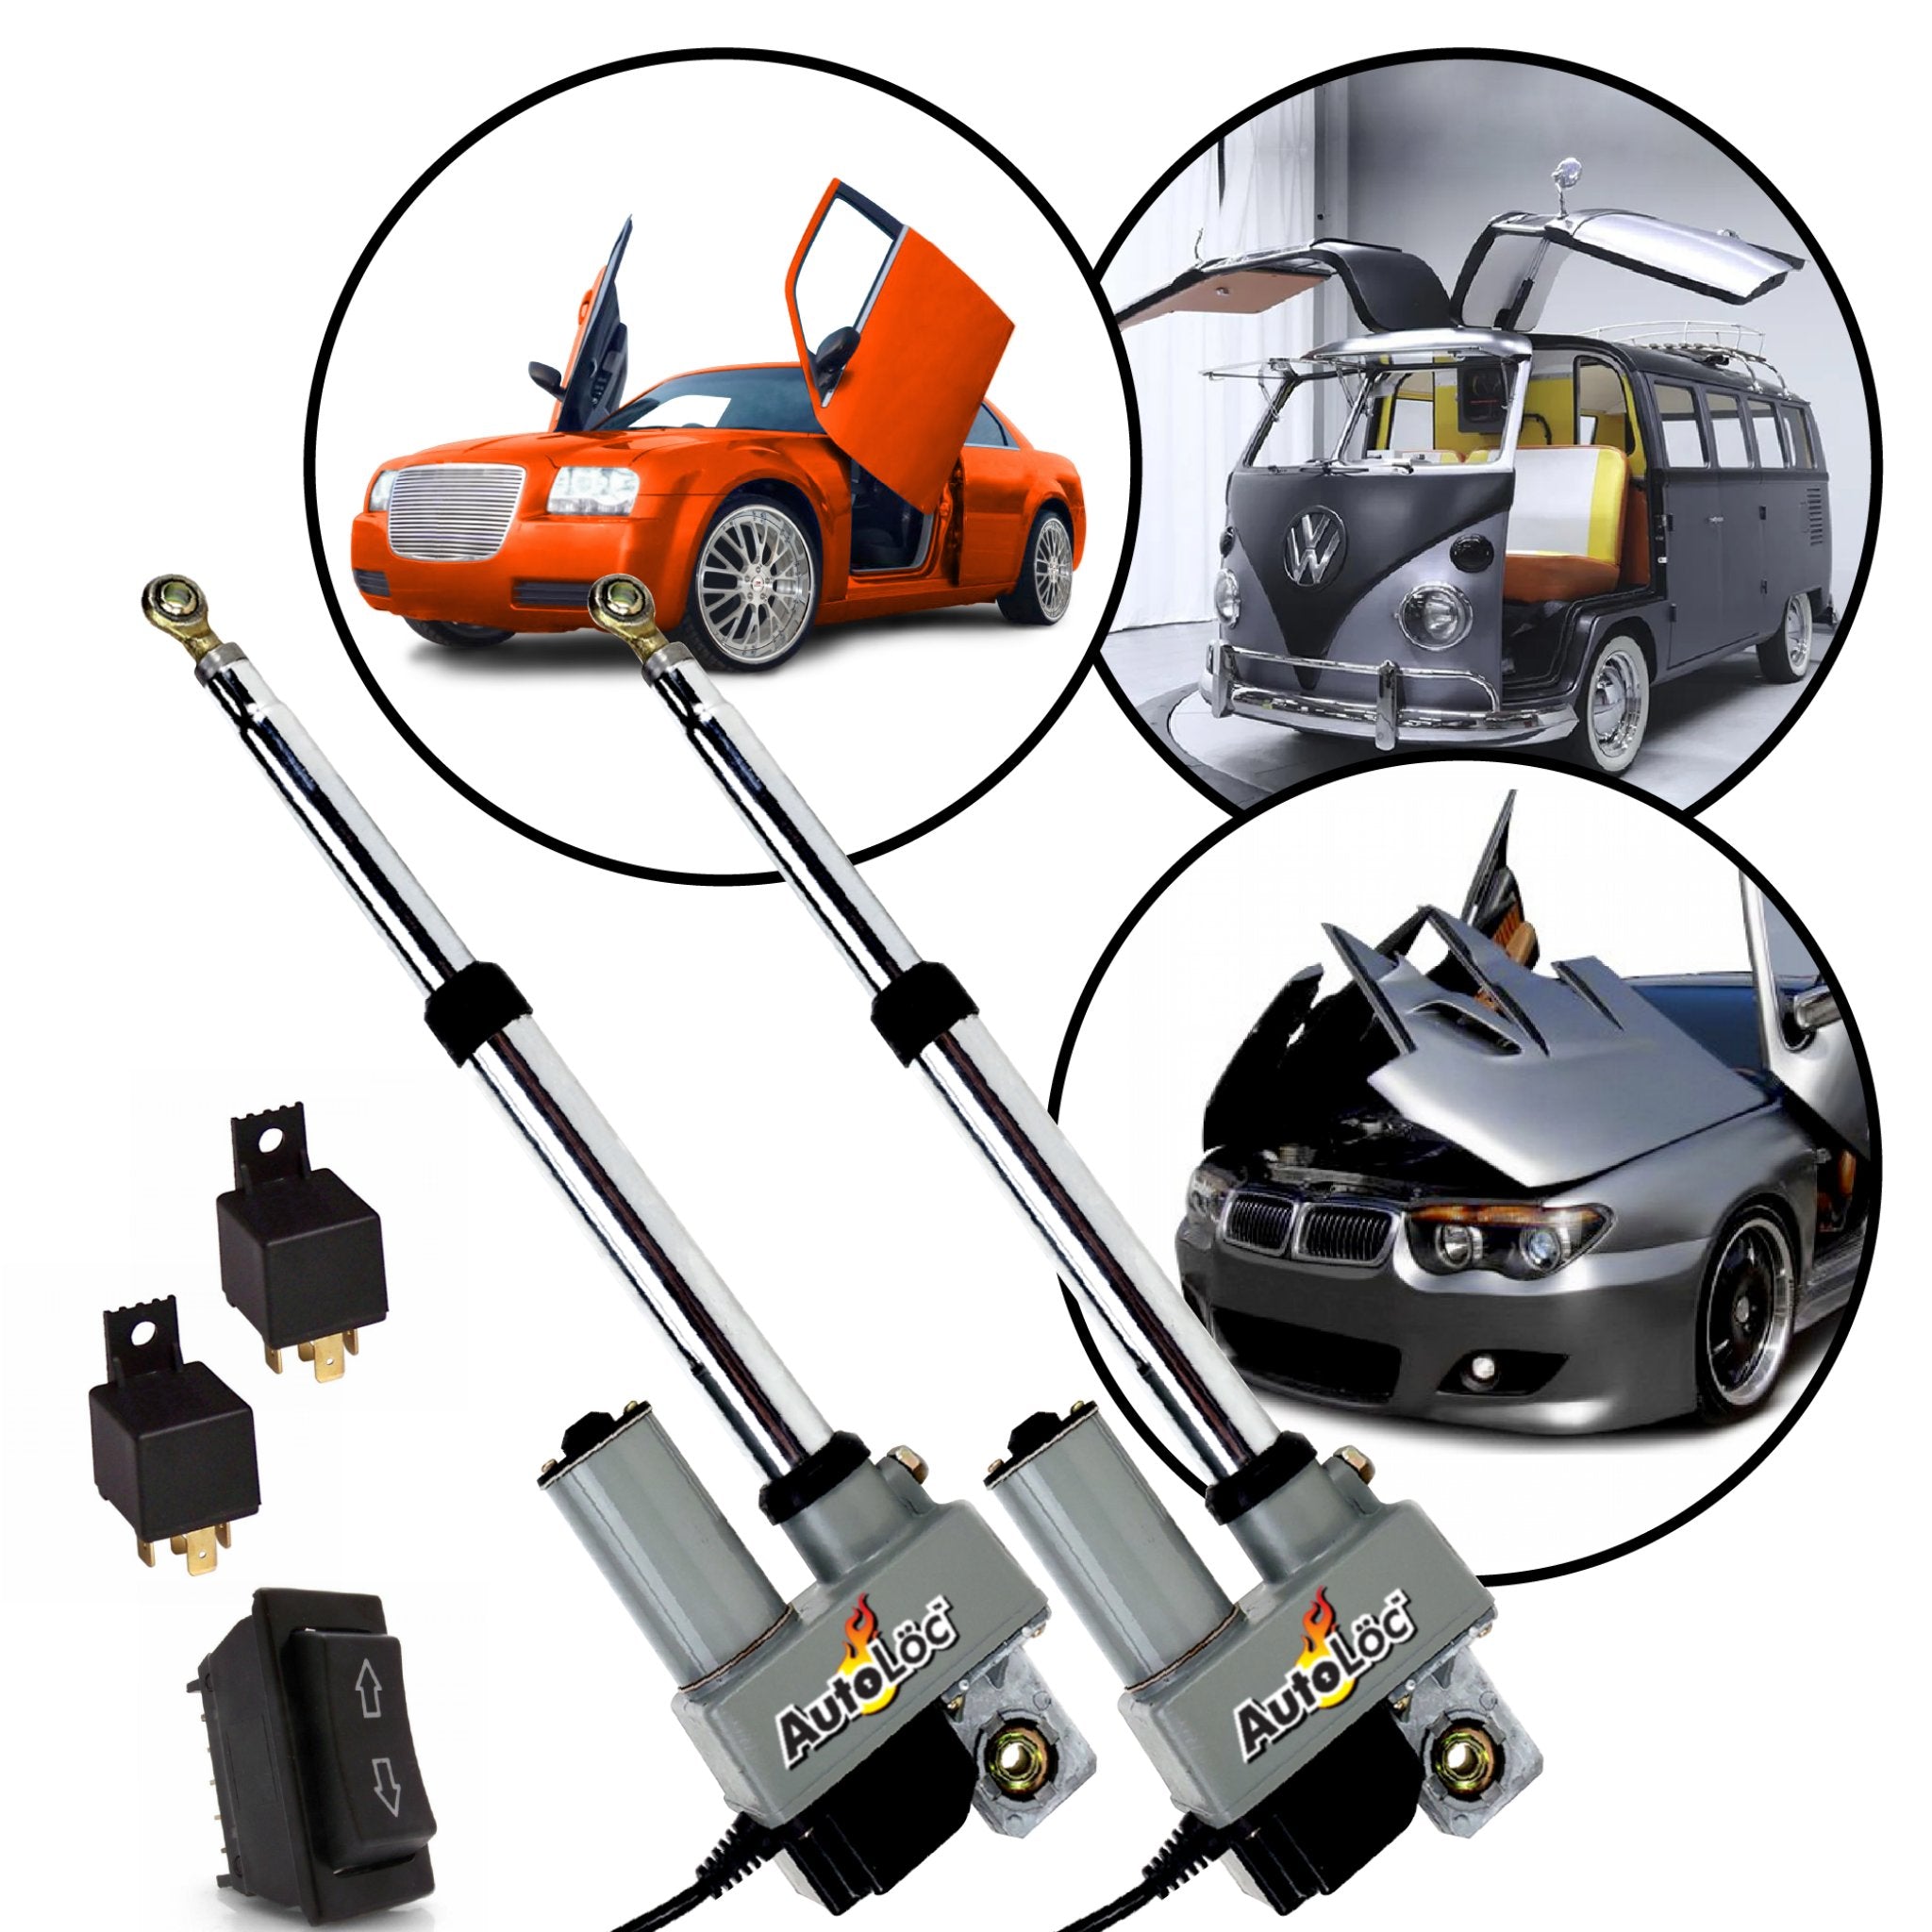 Heavy Duty 2 Door Automated Car Door Power Hinge Kit for Lambo Gullwing Vertical